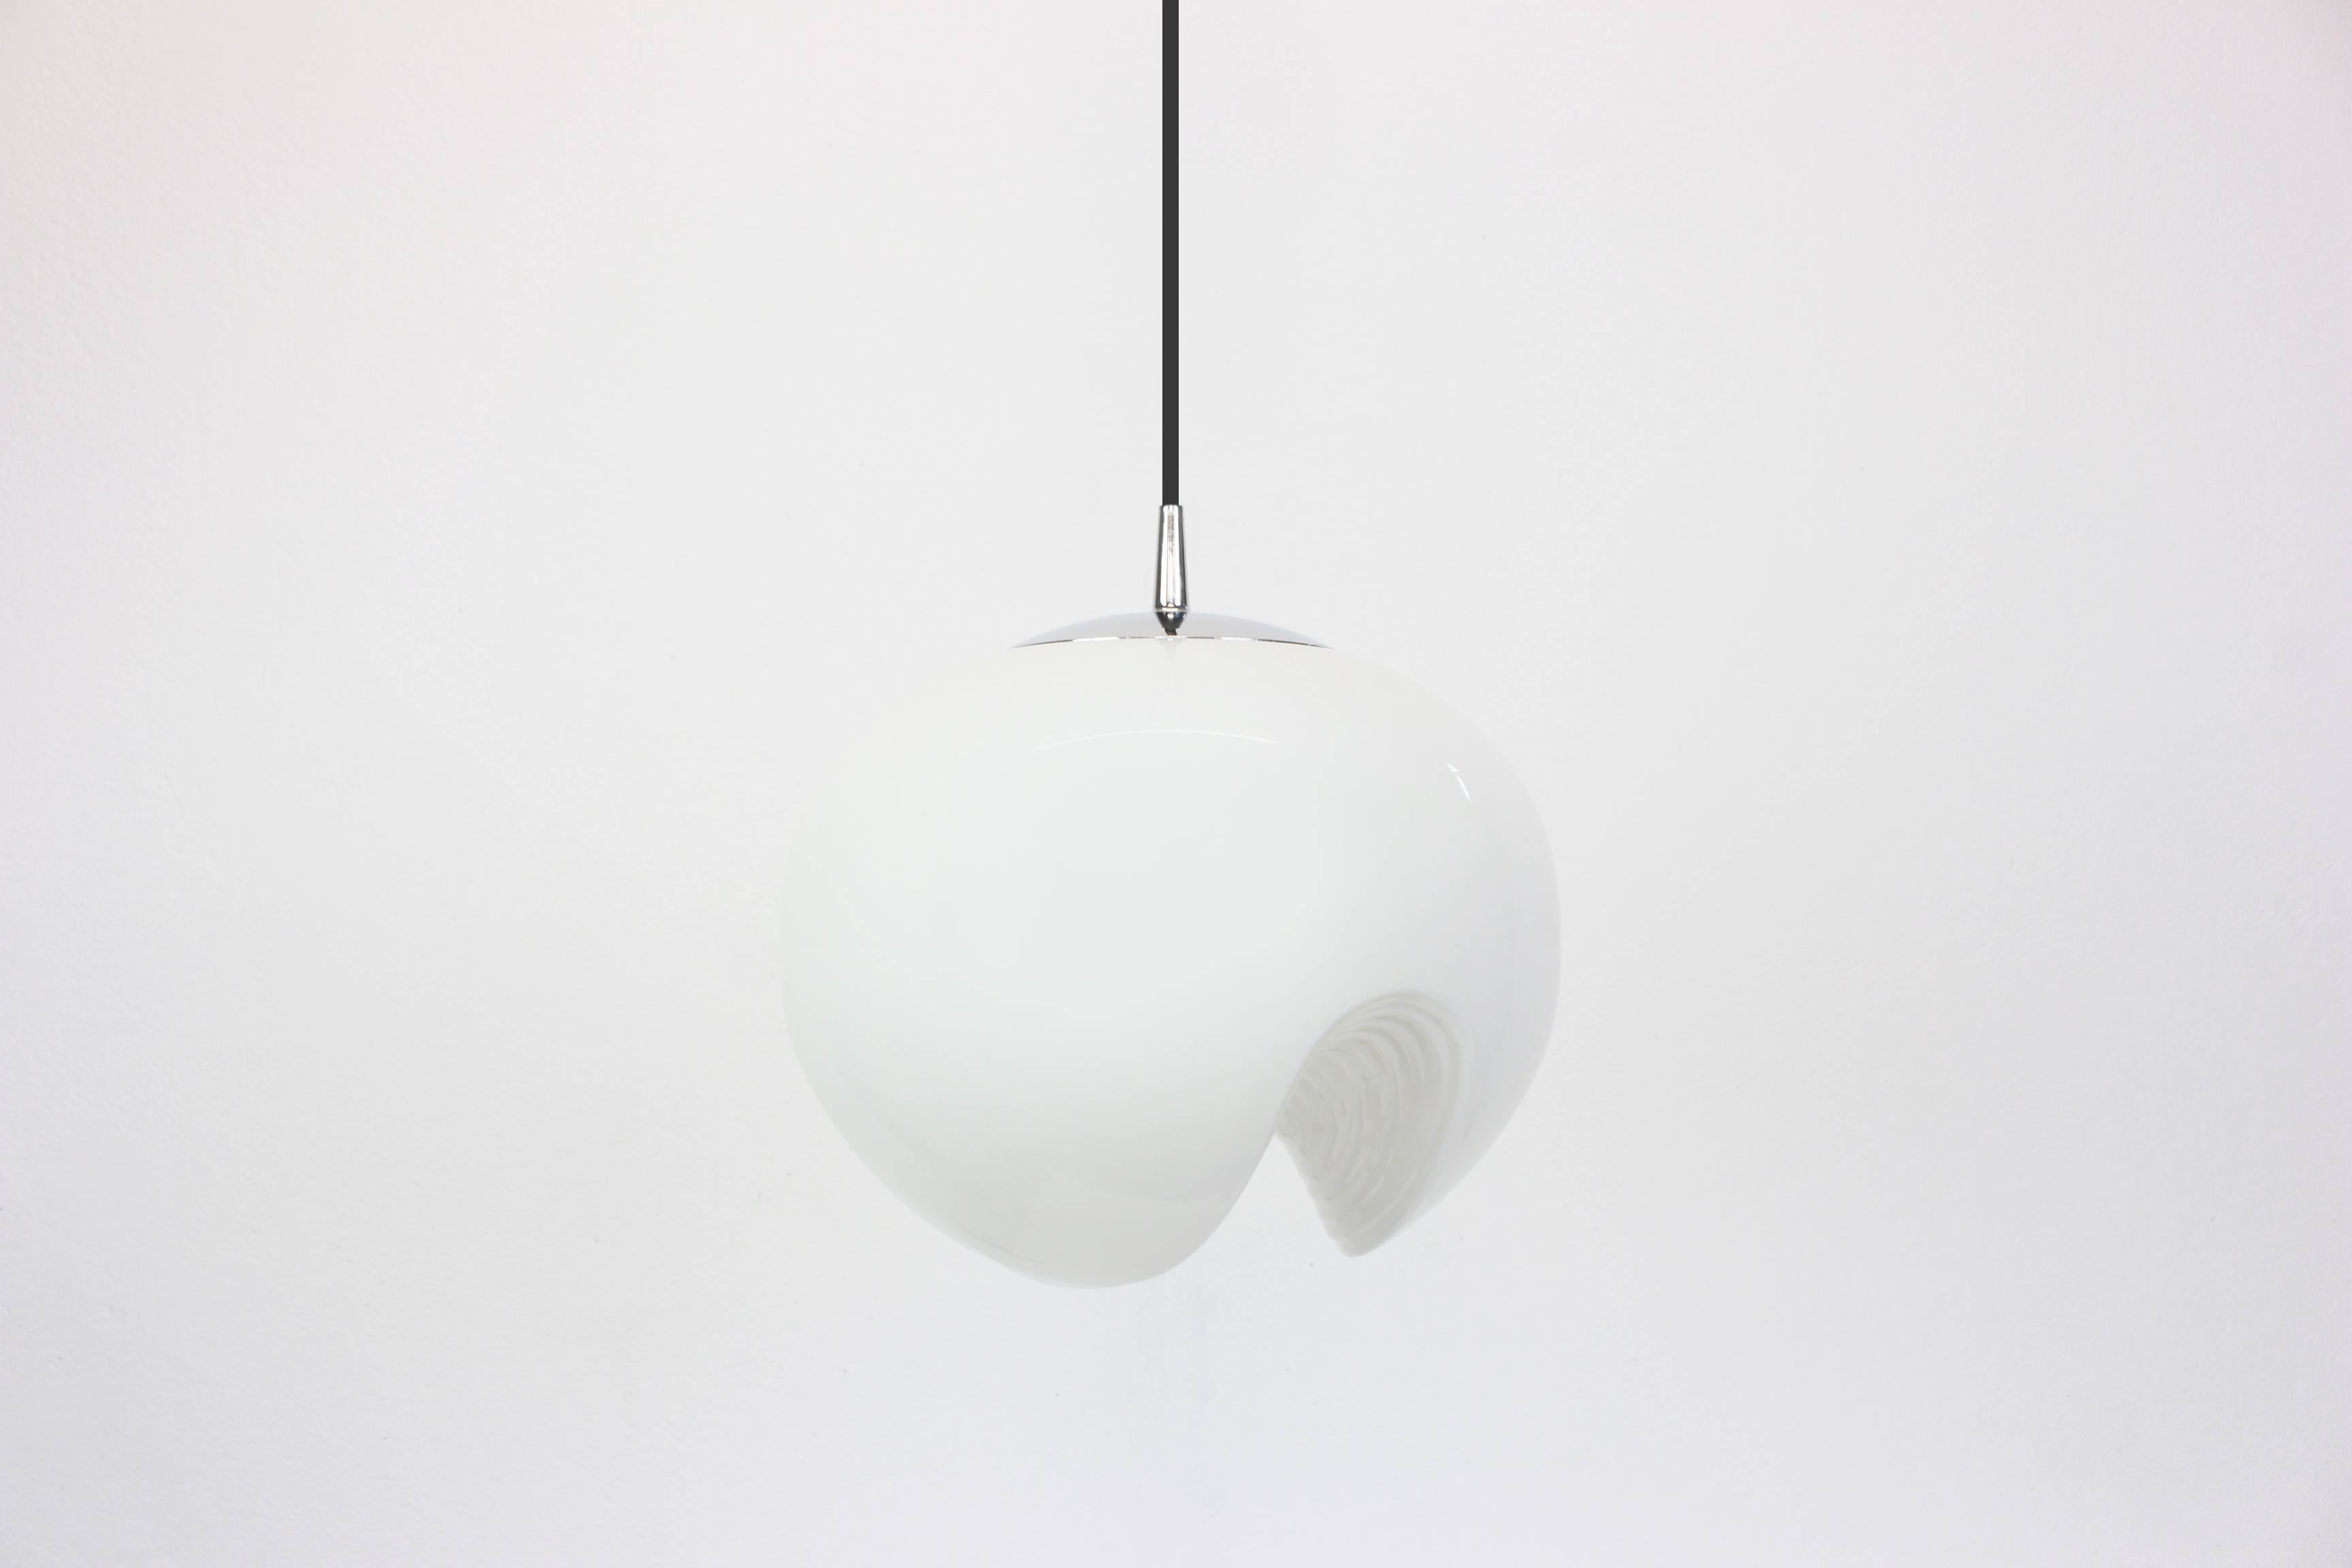 A special round biomorphic white molded glass pendant designed by Koch & Lowy for Peill & Putzler, manufactured in Germany, circa 1970s.

High quality and in very good condition. Cleaned, well-wired and ready to use. 

The fixture requires 1